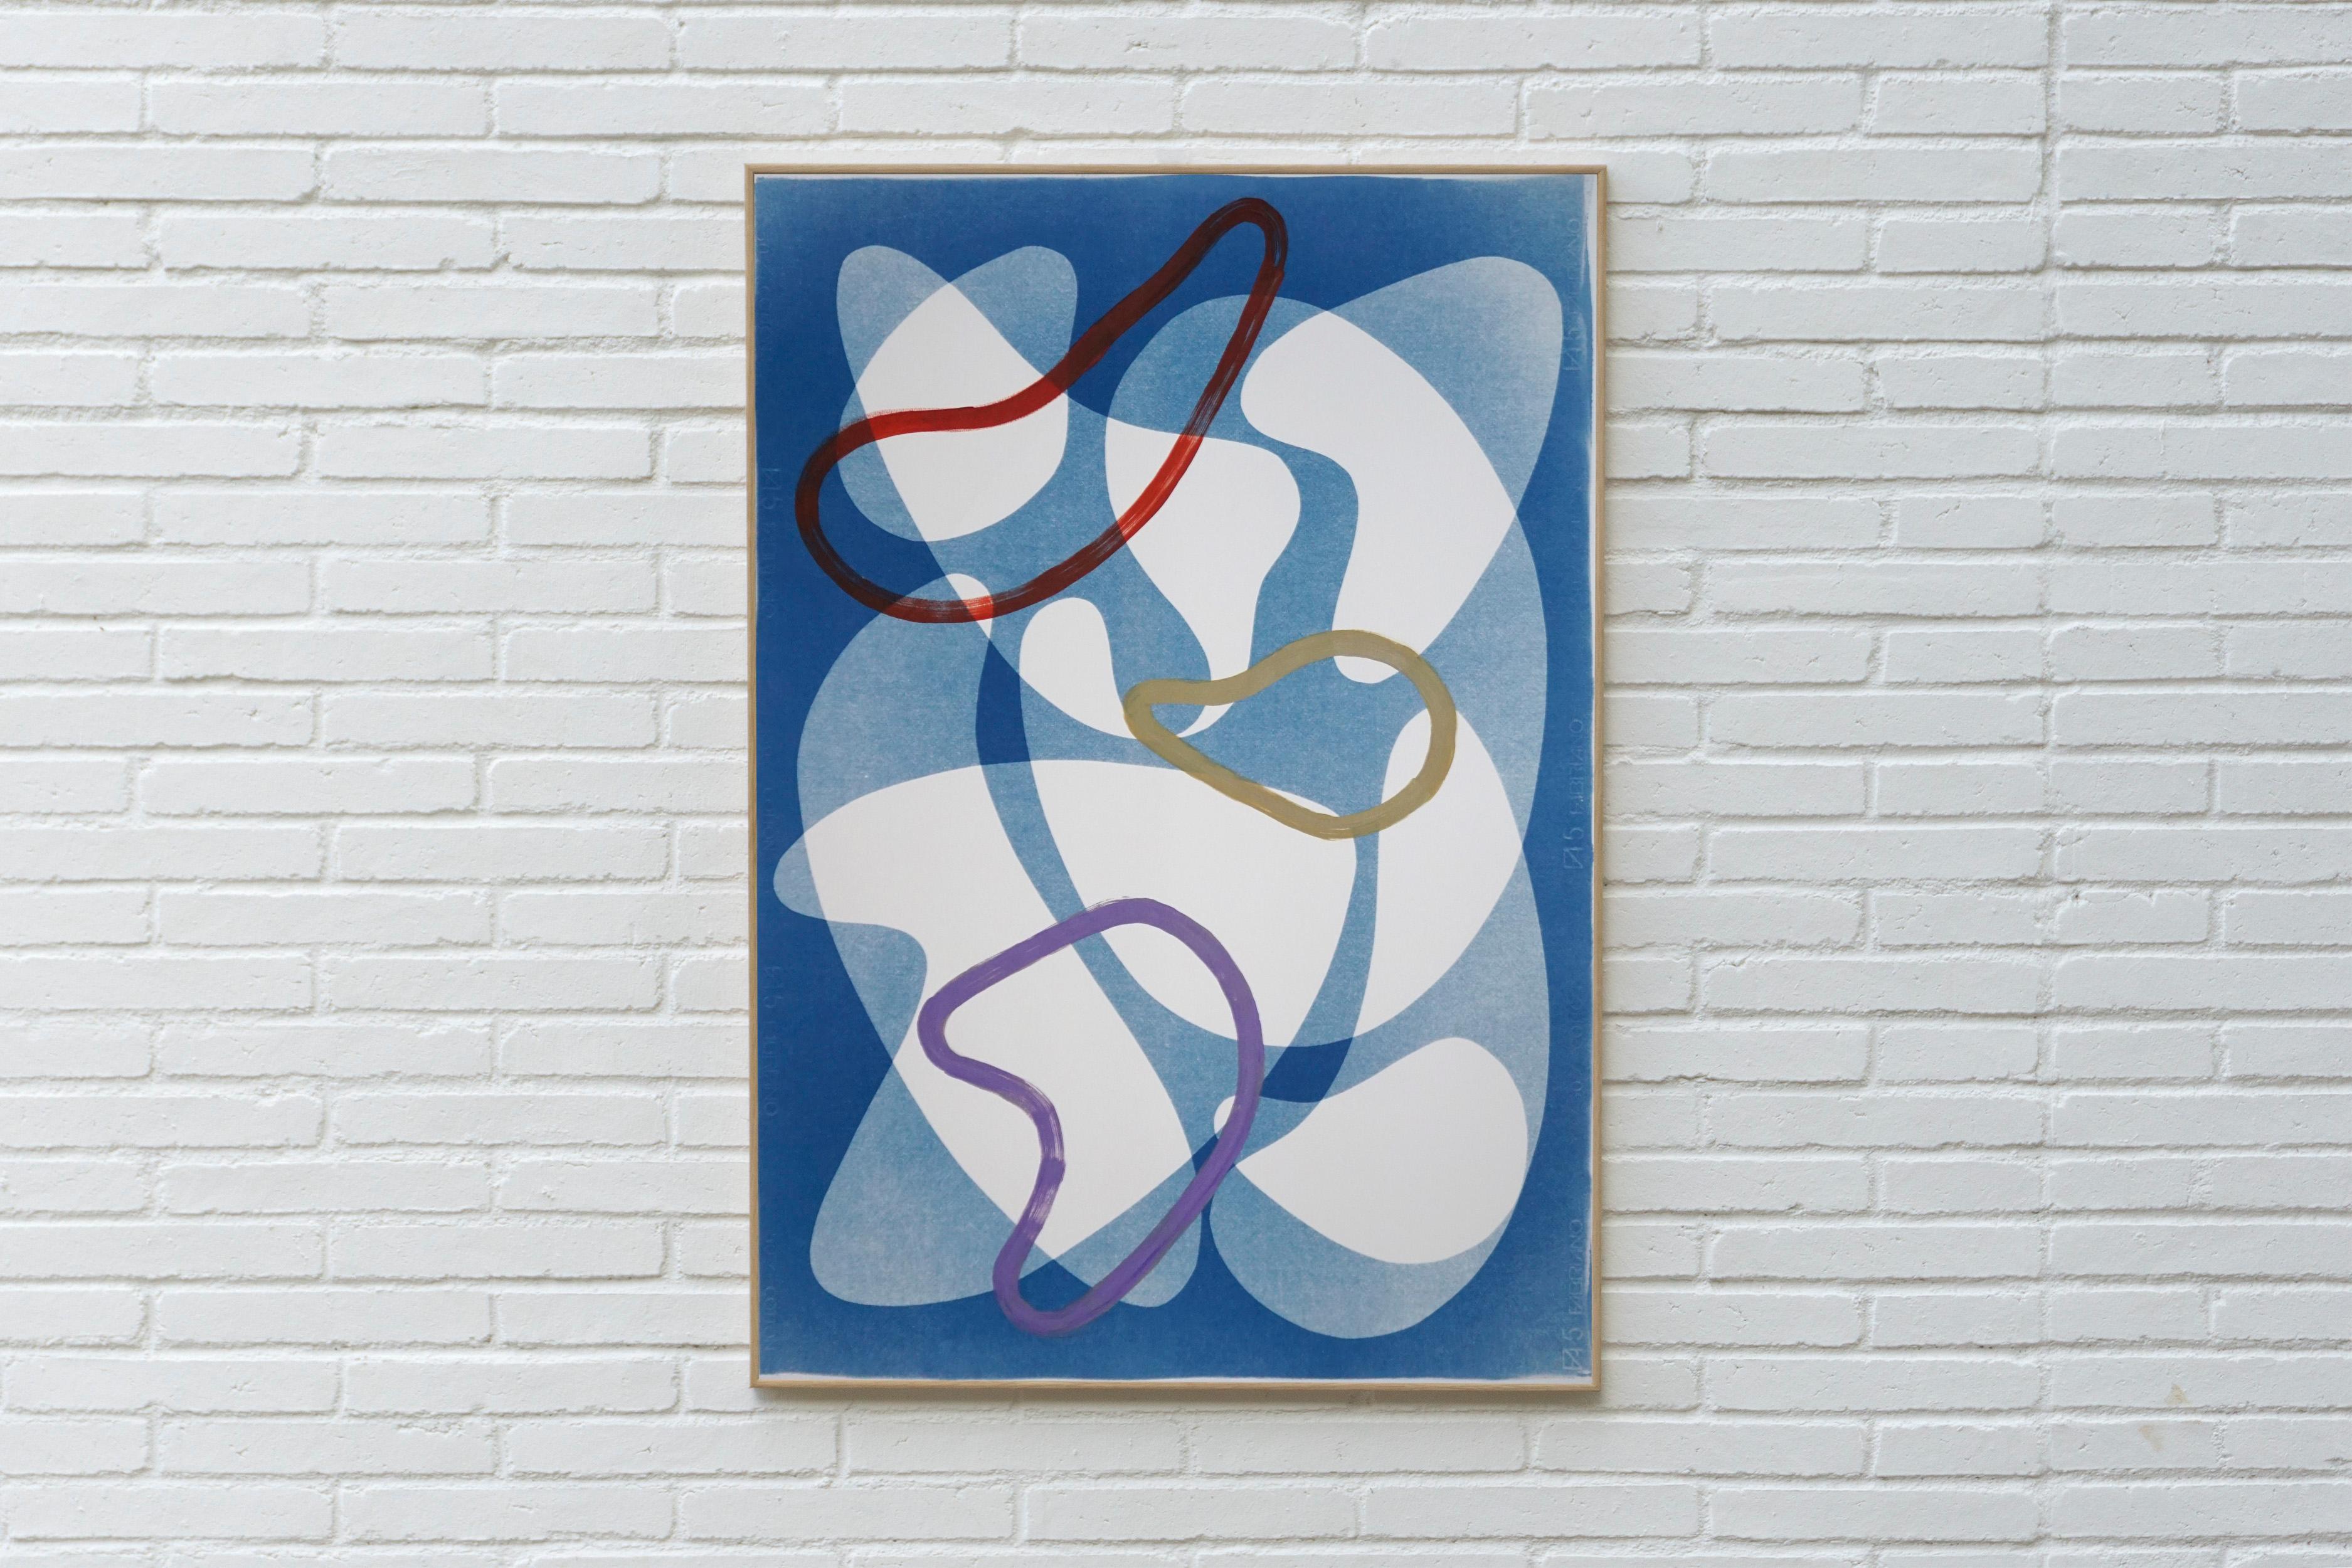 This is a unique mixed media piece: it is three hand-painted abstract colorful shapes upon a background that is a cyanotype - monotype inspired by mid-century modern shapes.

It's made by layering paper cutouts and different exposures using